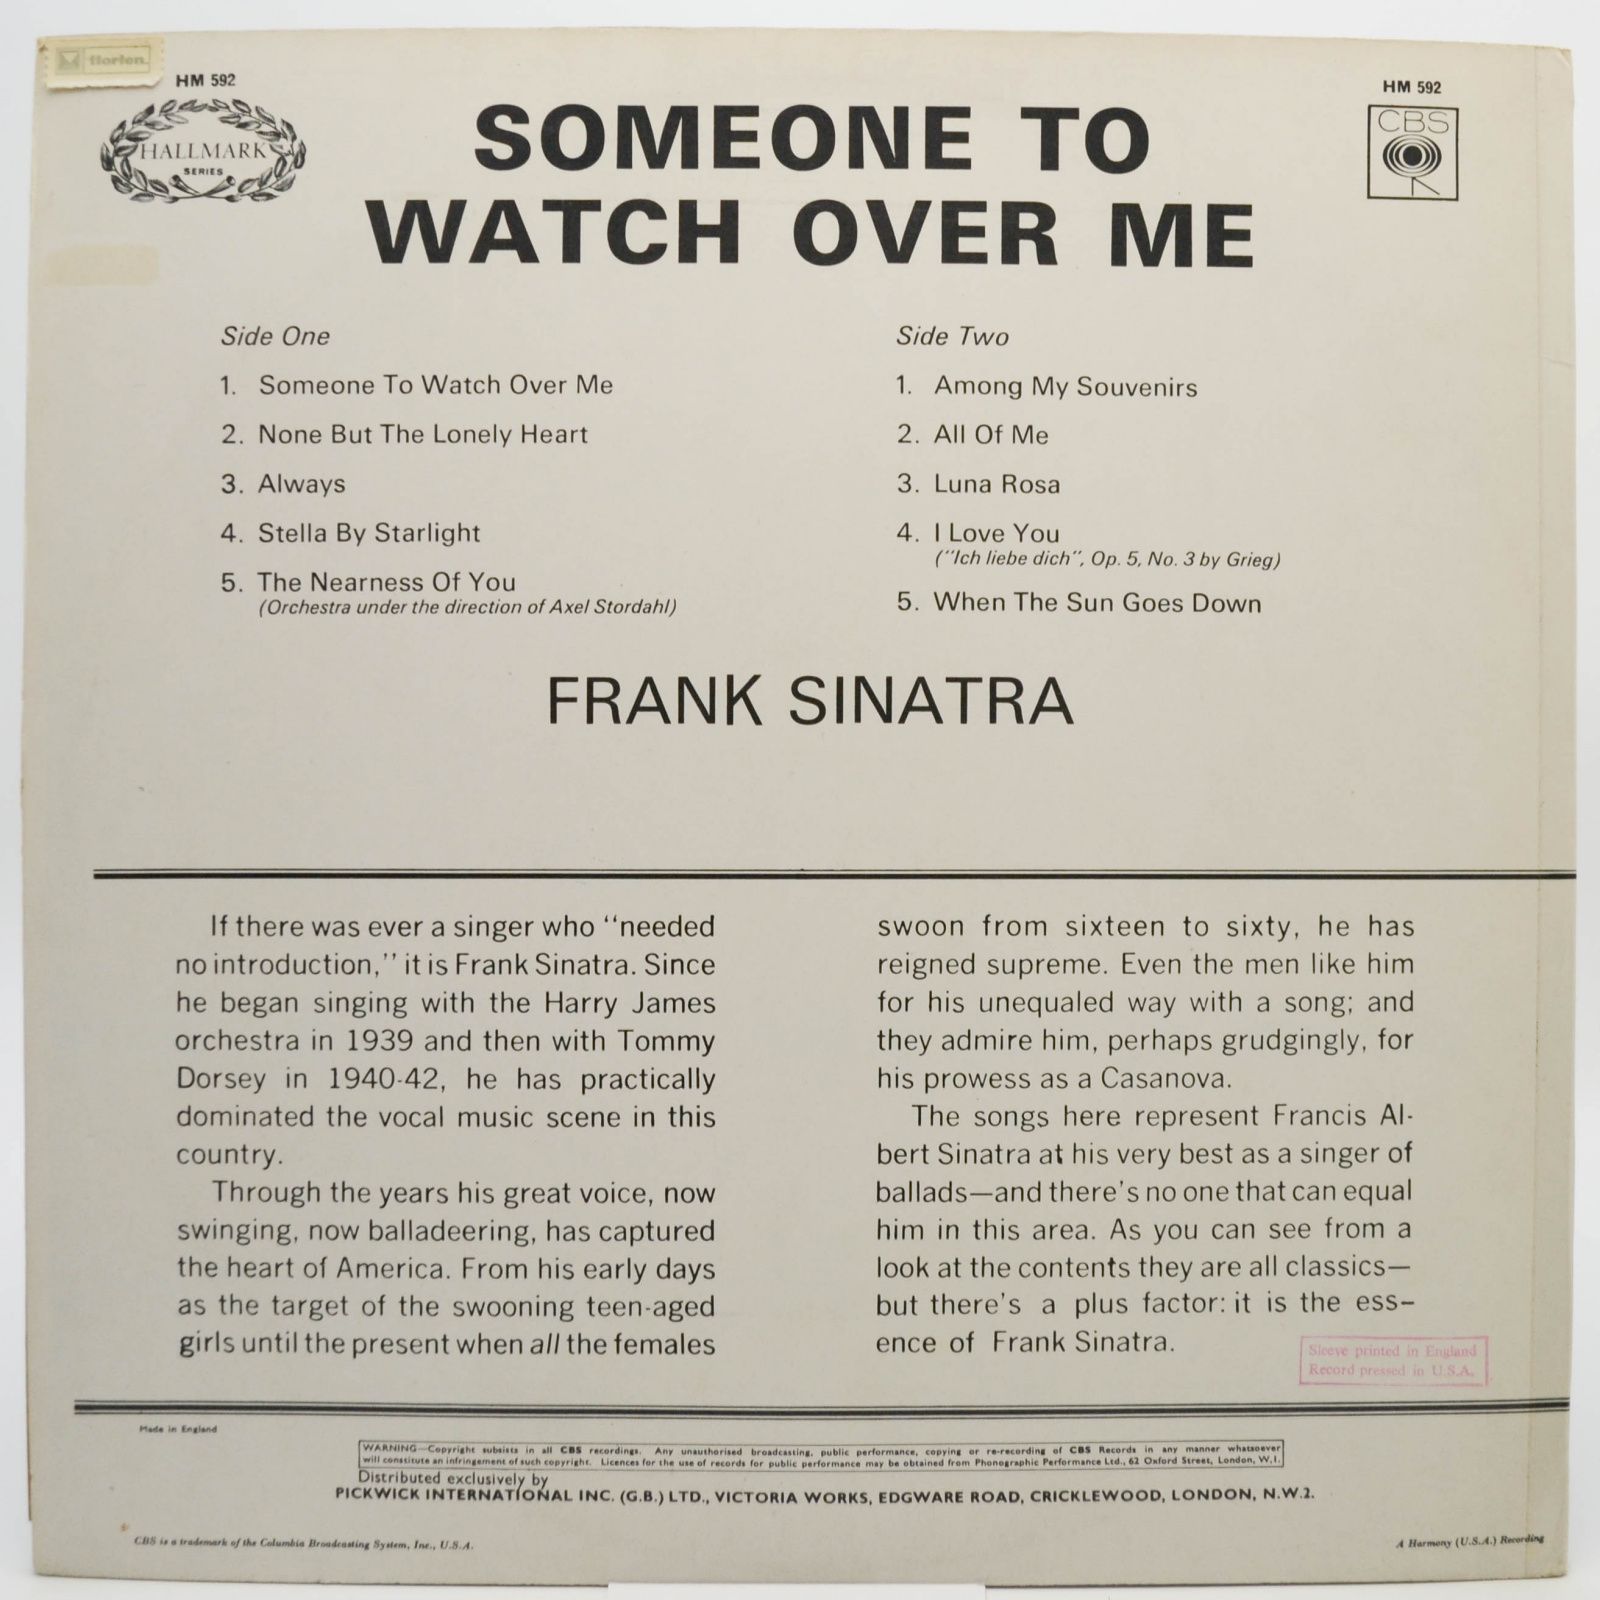 Frank Sinatra — Someone To Watch Over Me (UK), 1968